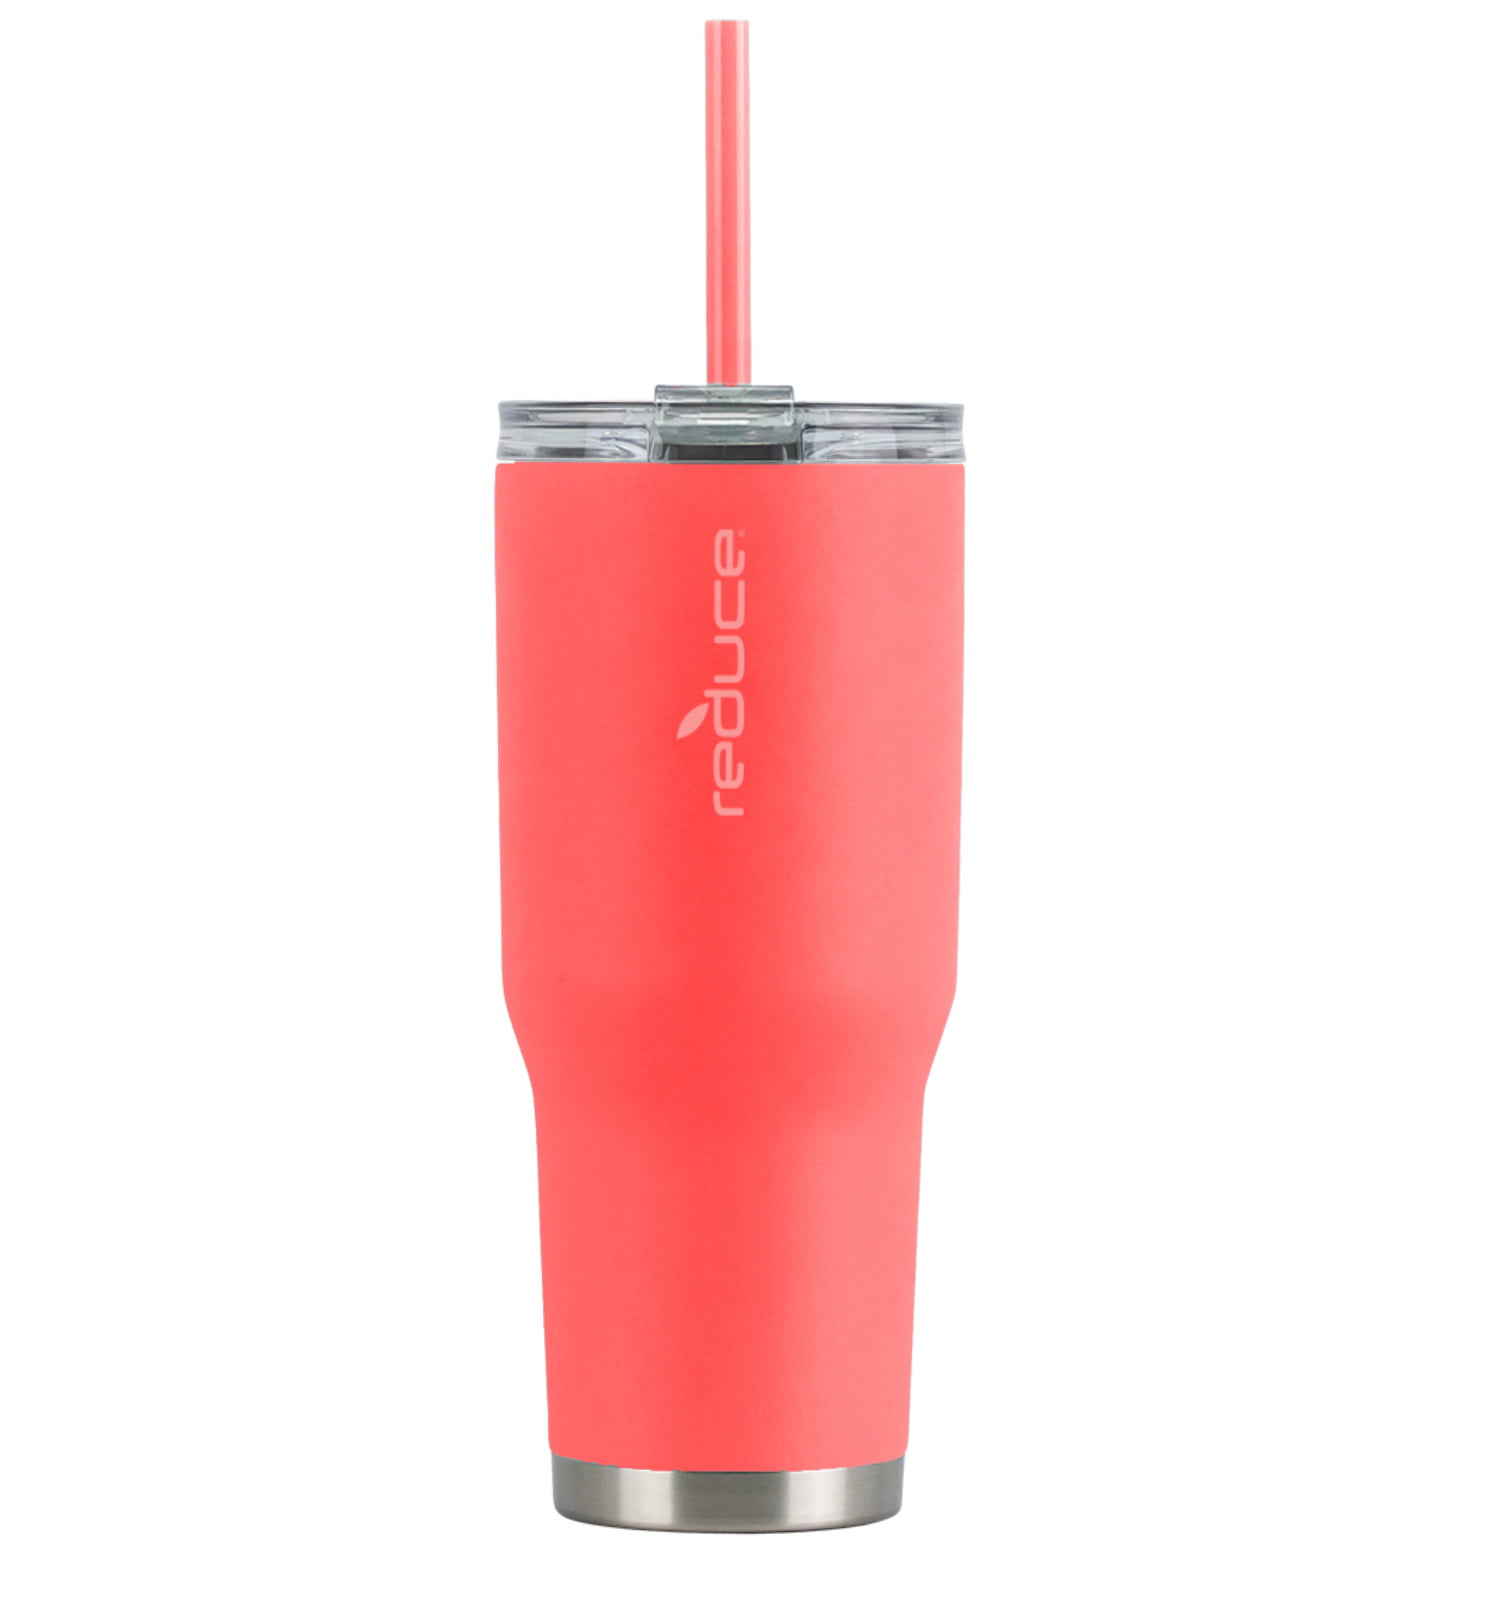 Reduce-cold-1-Stainless-Steel-Insulated-Tumbler-cup-2-pack-Keeps-Cold-24Hrs  Reduce-cold-1-Stainles / gifts&gadgets